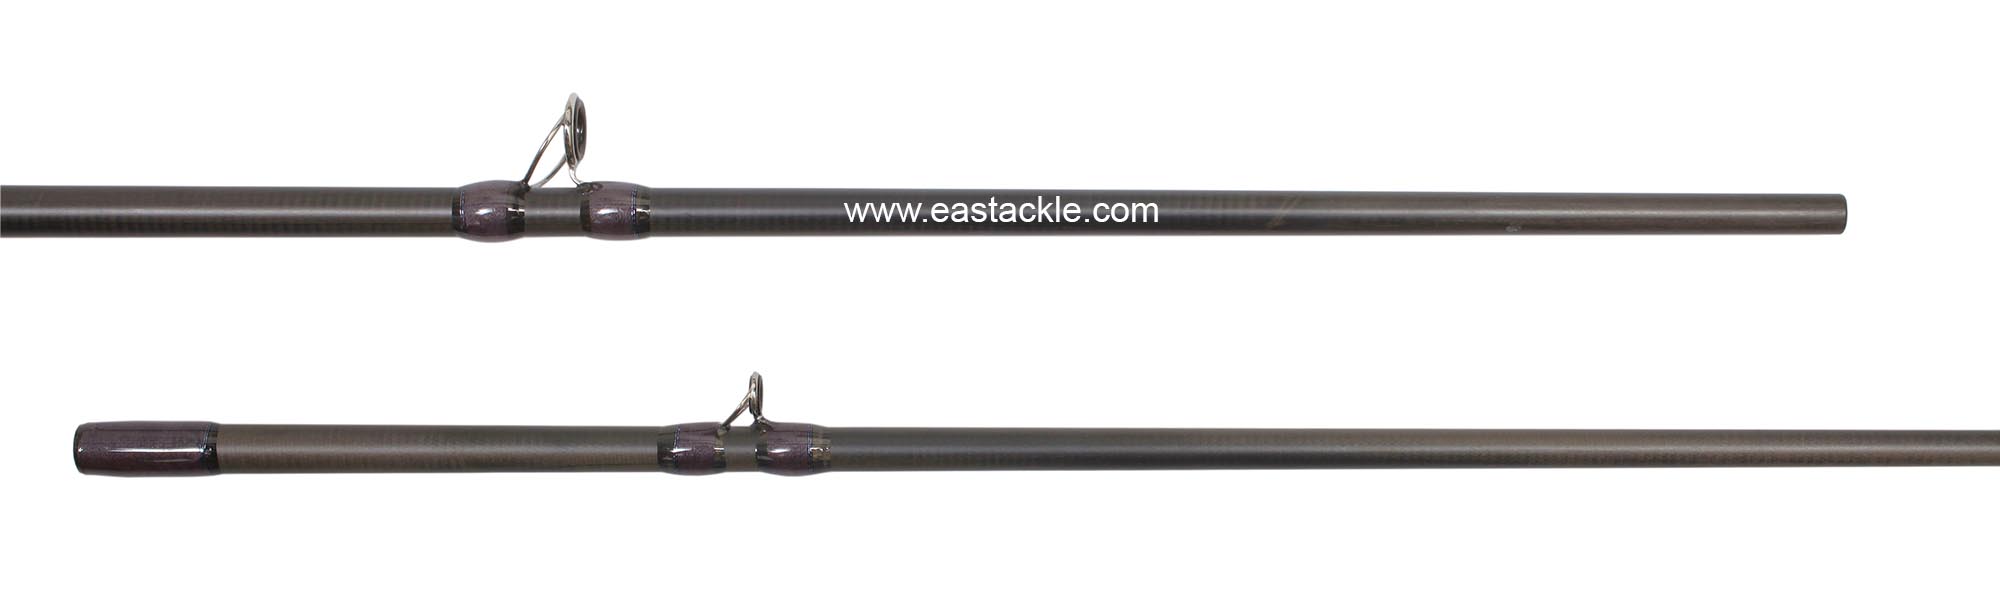 Storm - Adenture - Bait Casting Rod Series - Joint Section (Side View) | Eastackle